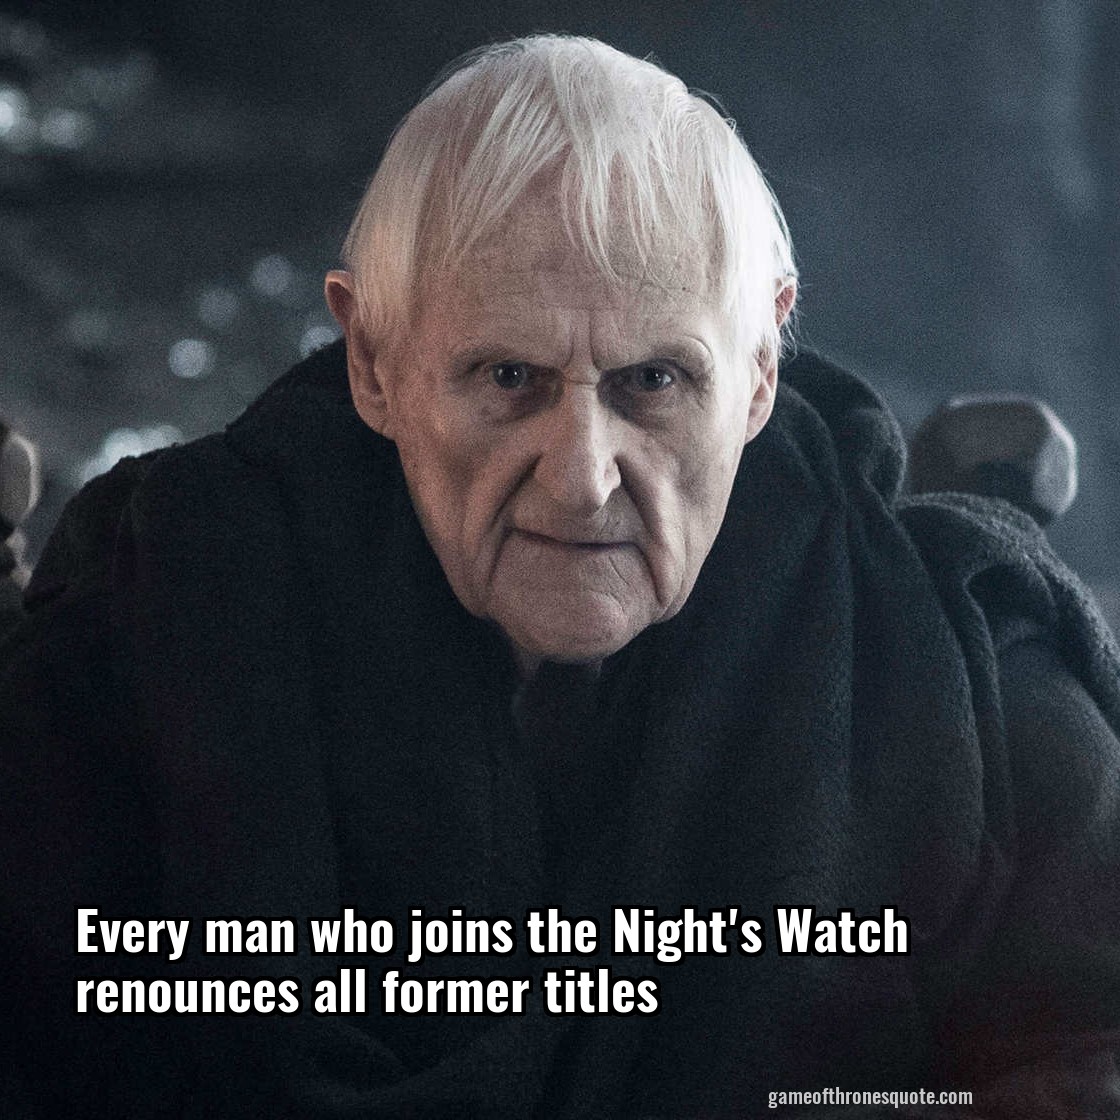 Every man who joins the Night's Watch renounces all former titles